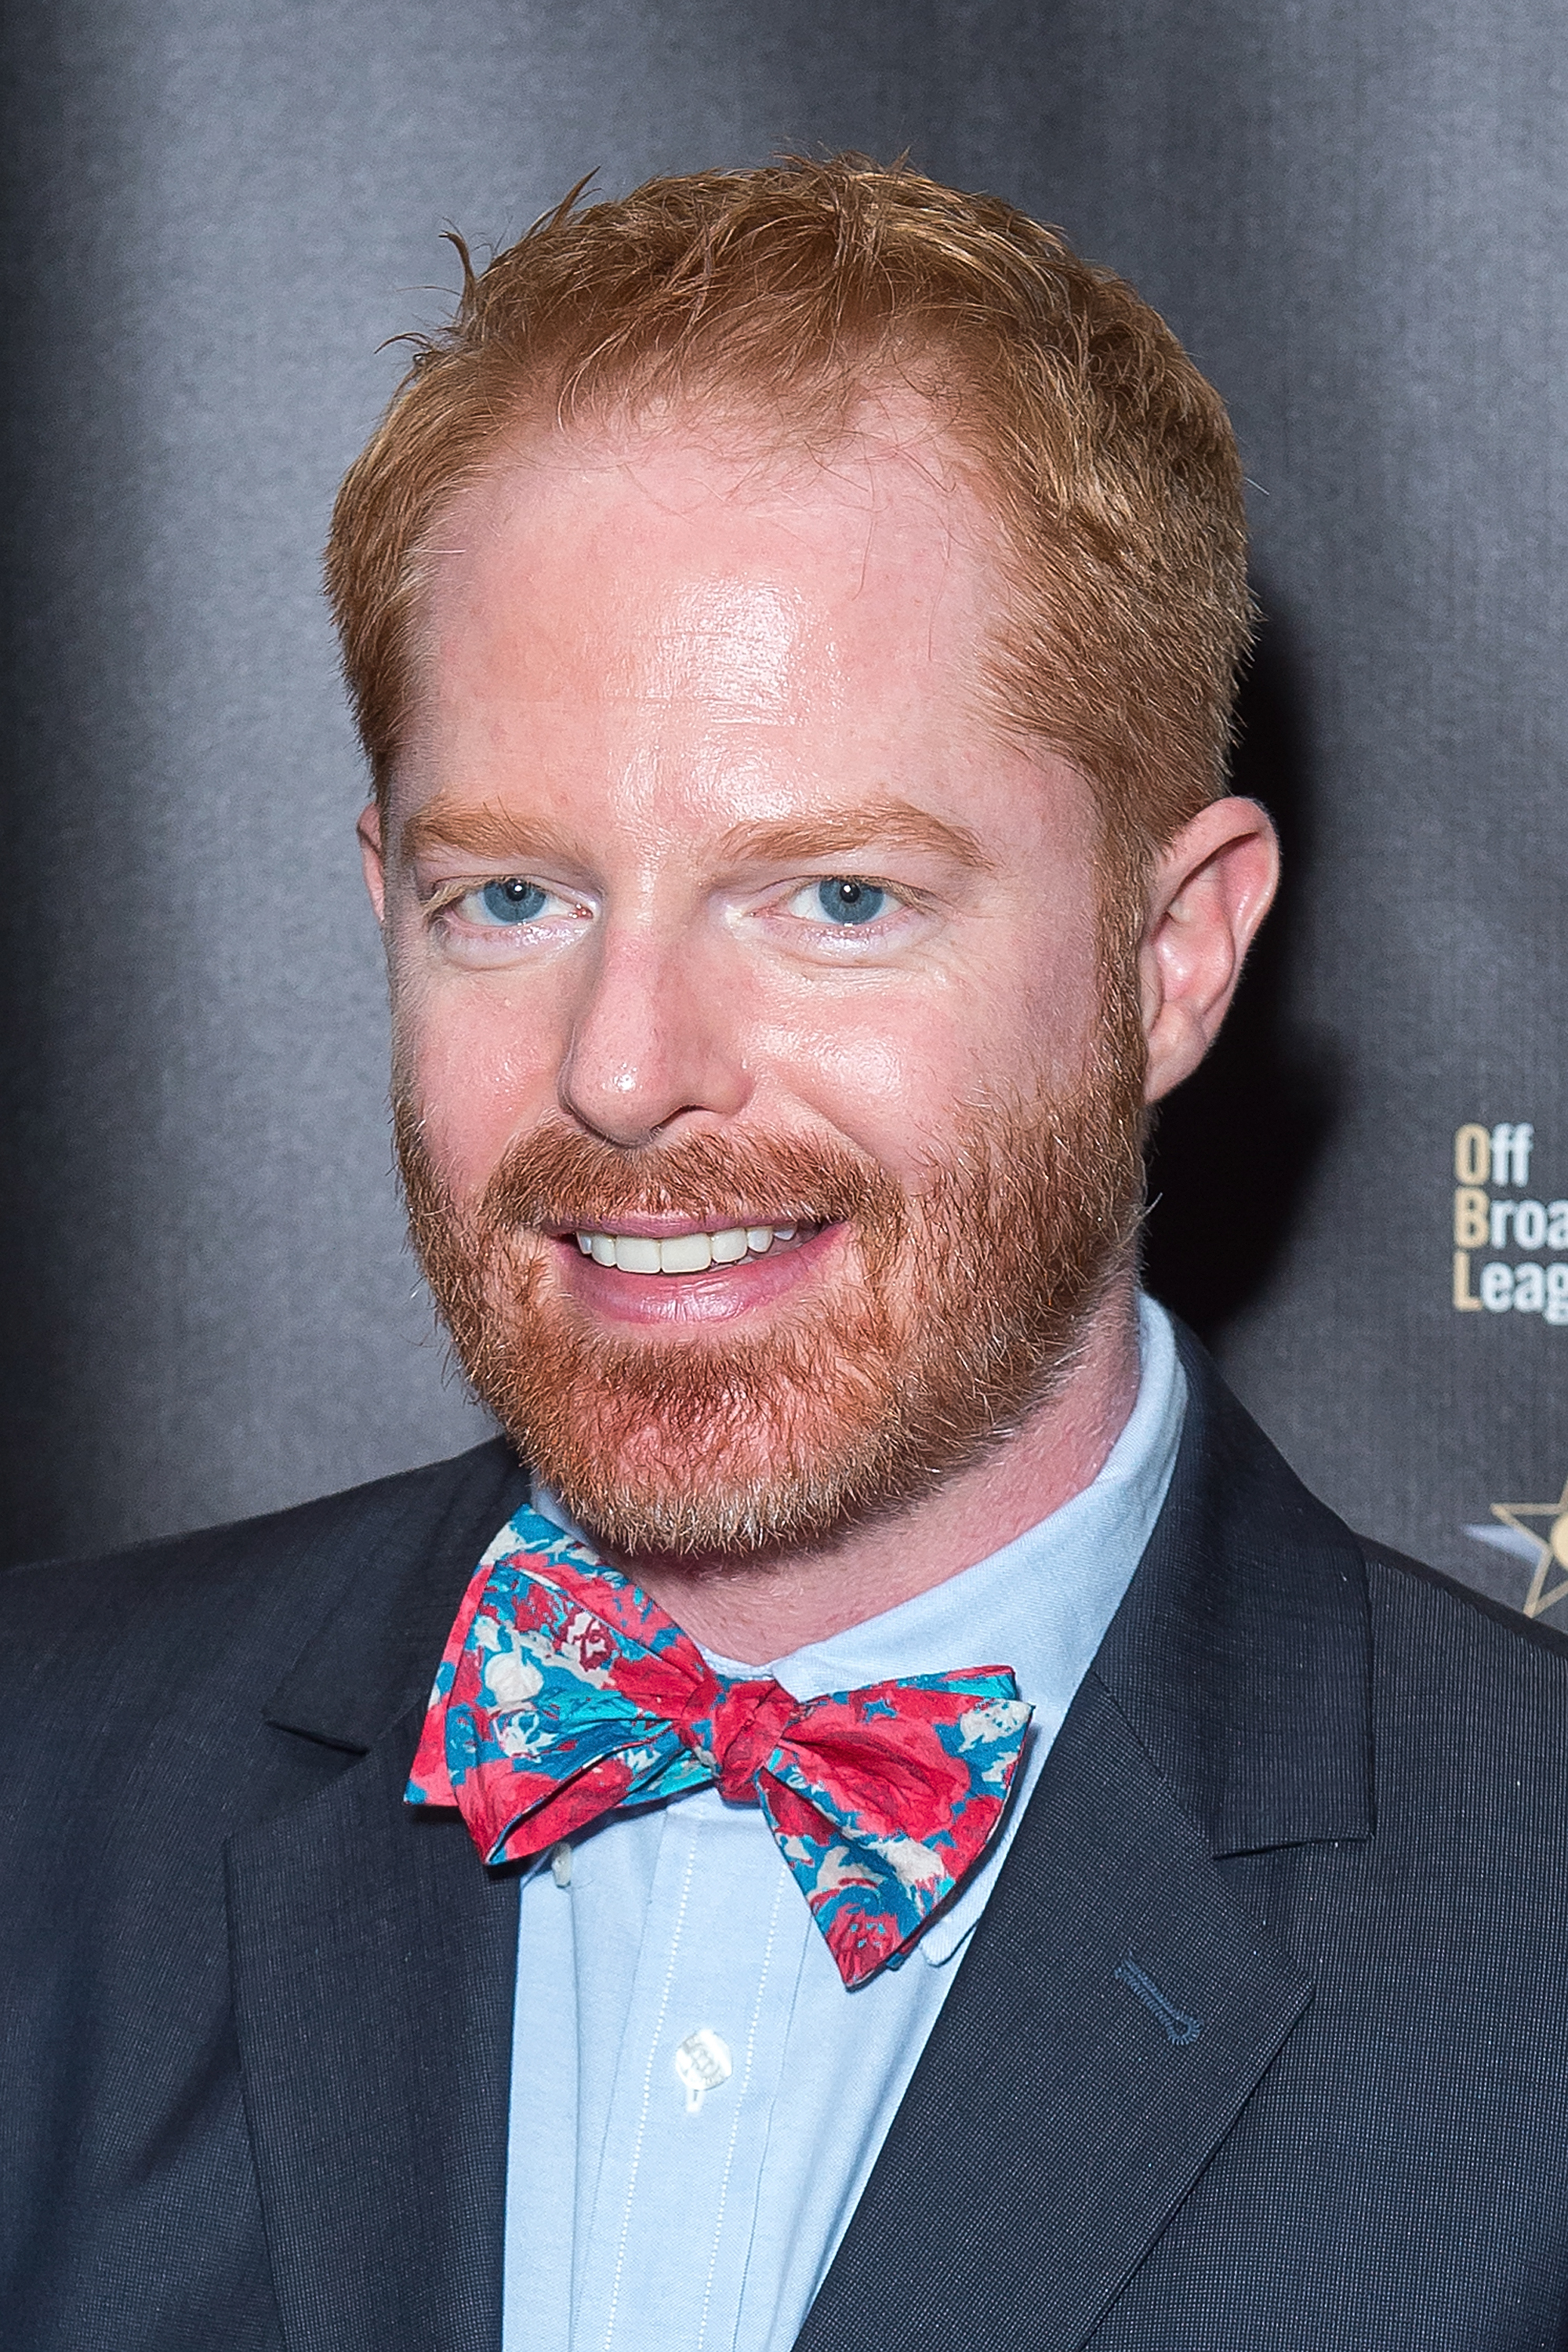 Actor Jesse Tyler Ferguson attends the 30th Annual Lucille Lortel Awards at NYU Skirball Center on May 10, 2015 in New York City.